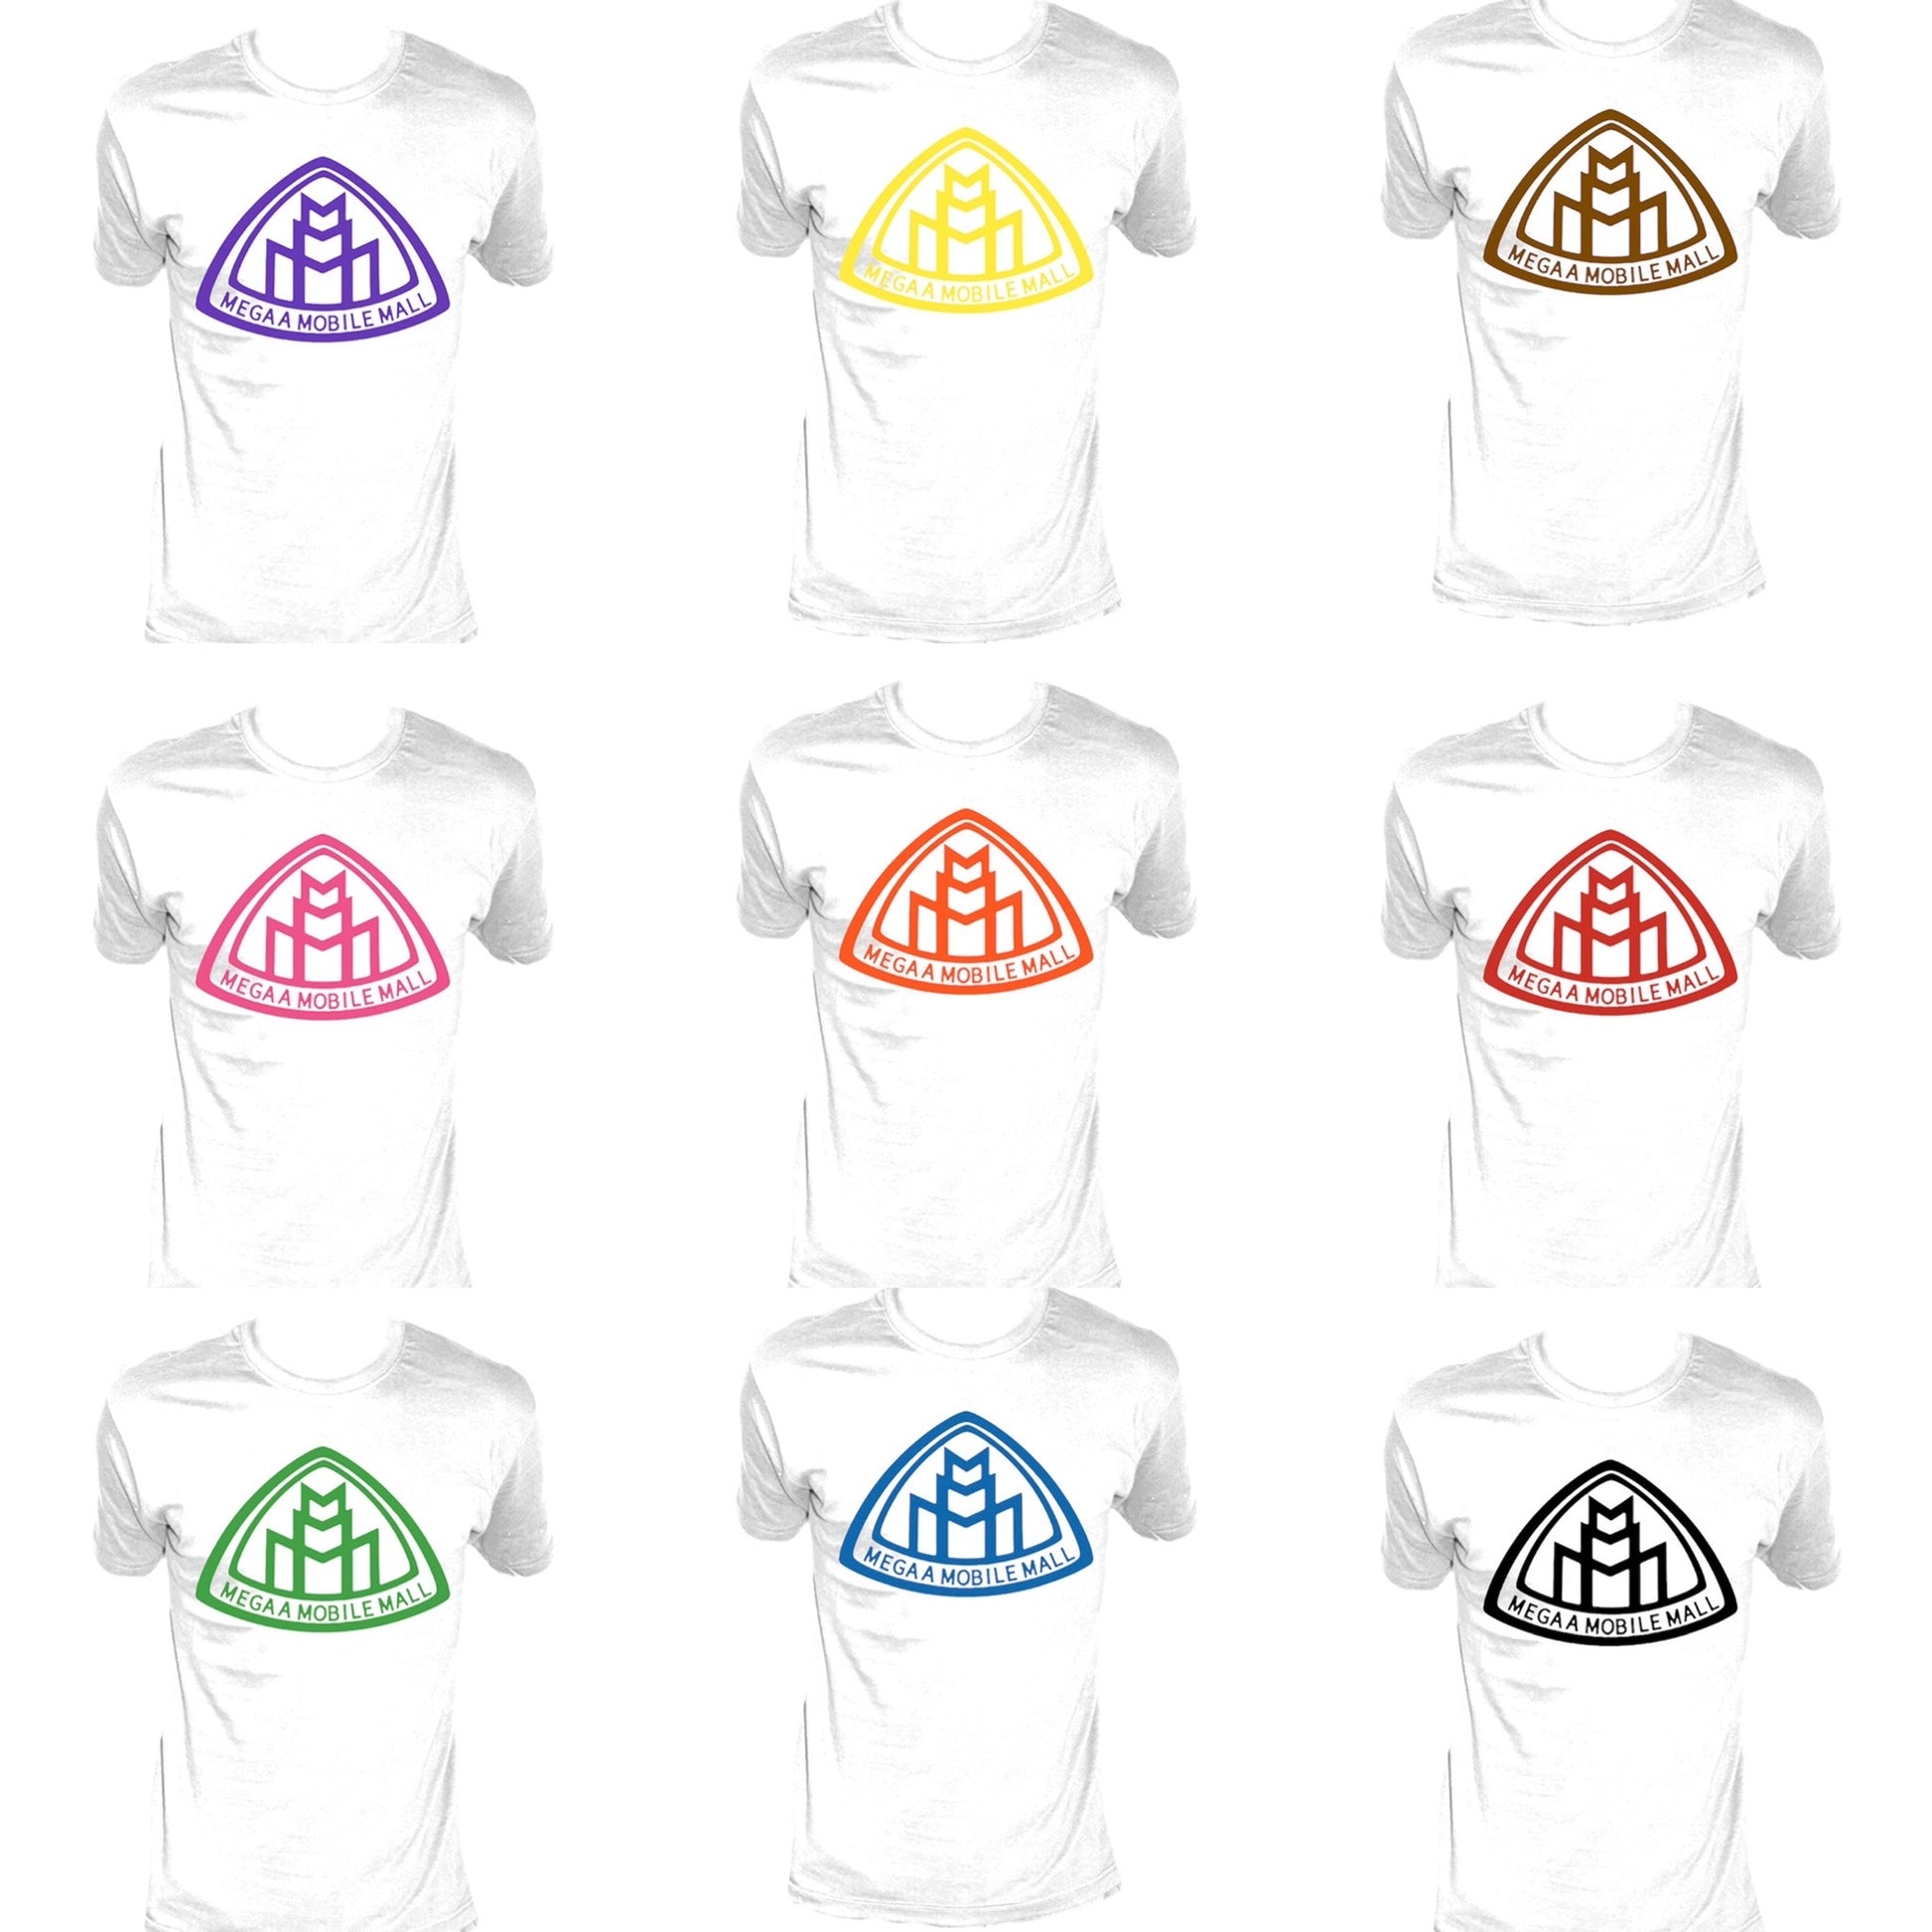 megaamobilemall White Shirt in 9 color logo options